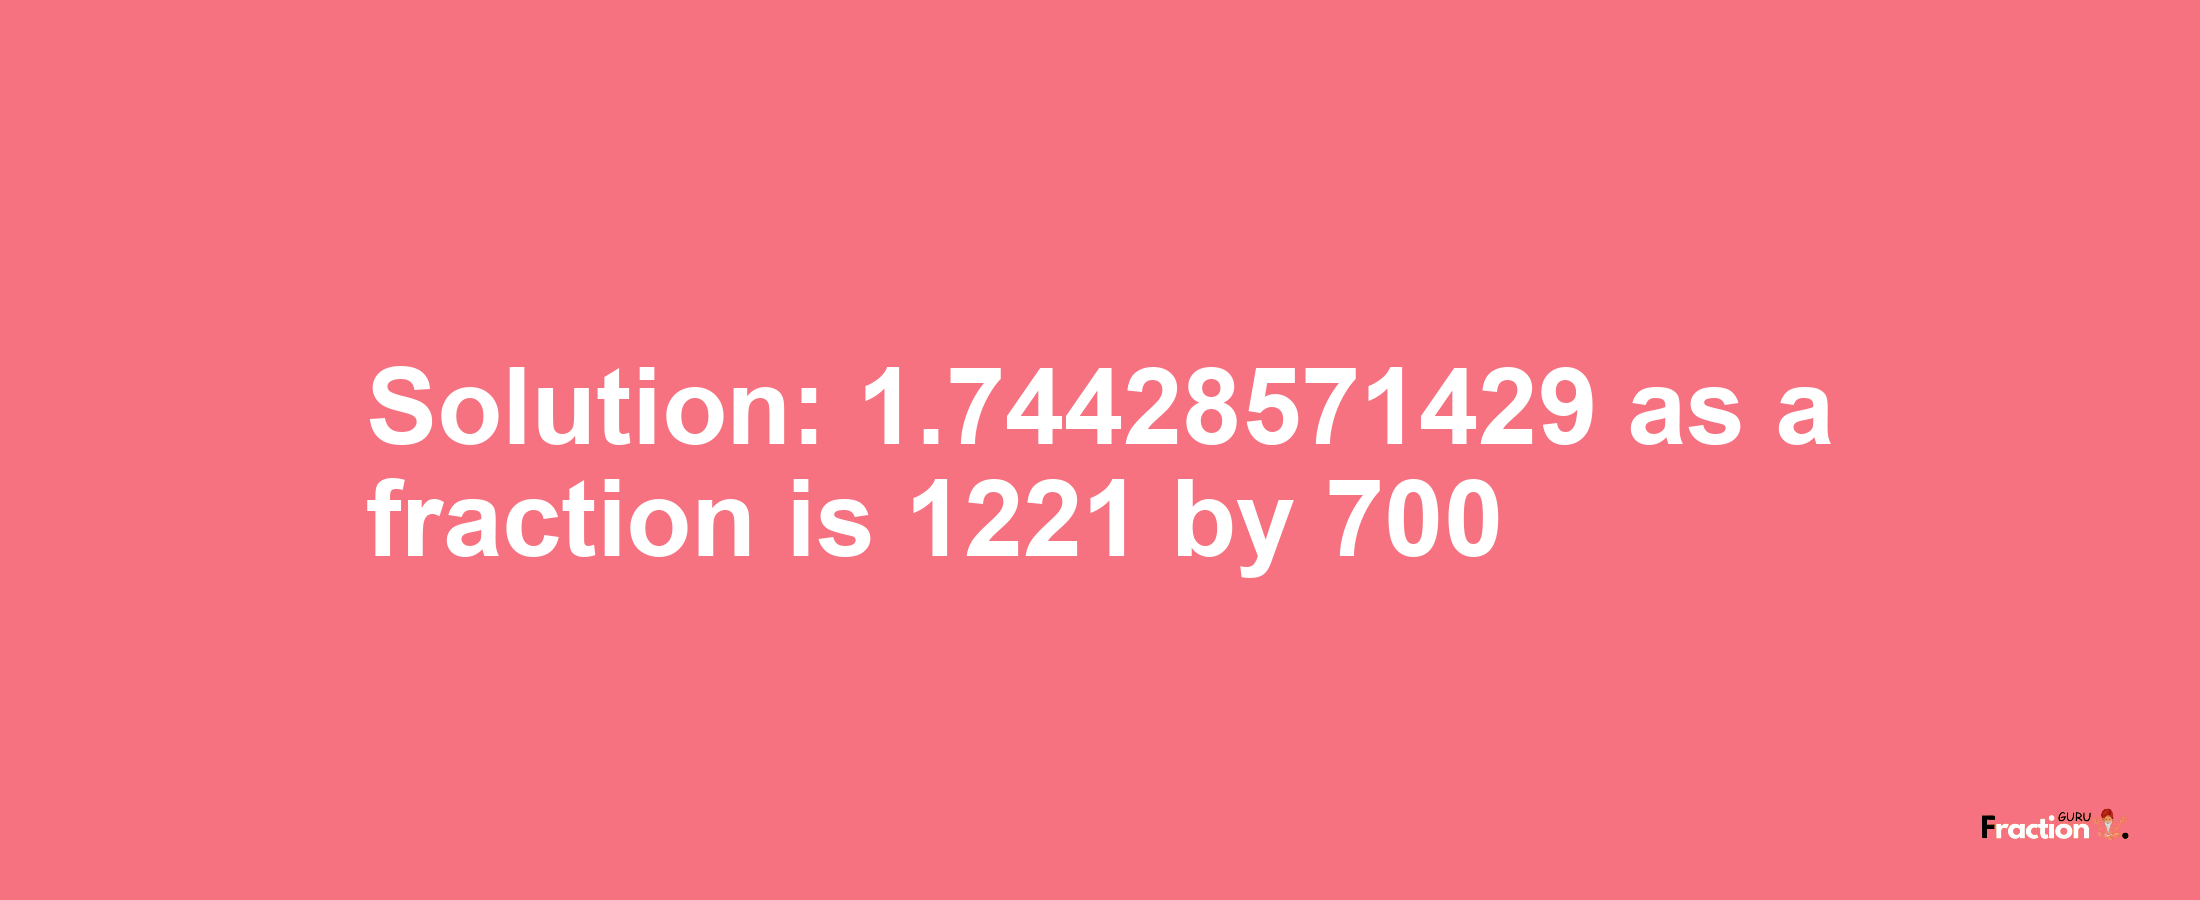 Solution:1.74428571429 as a fraction is 1221/700